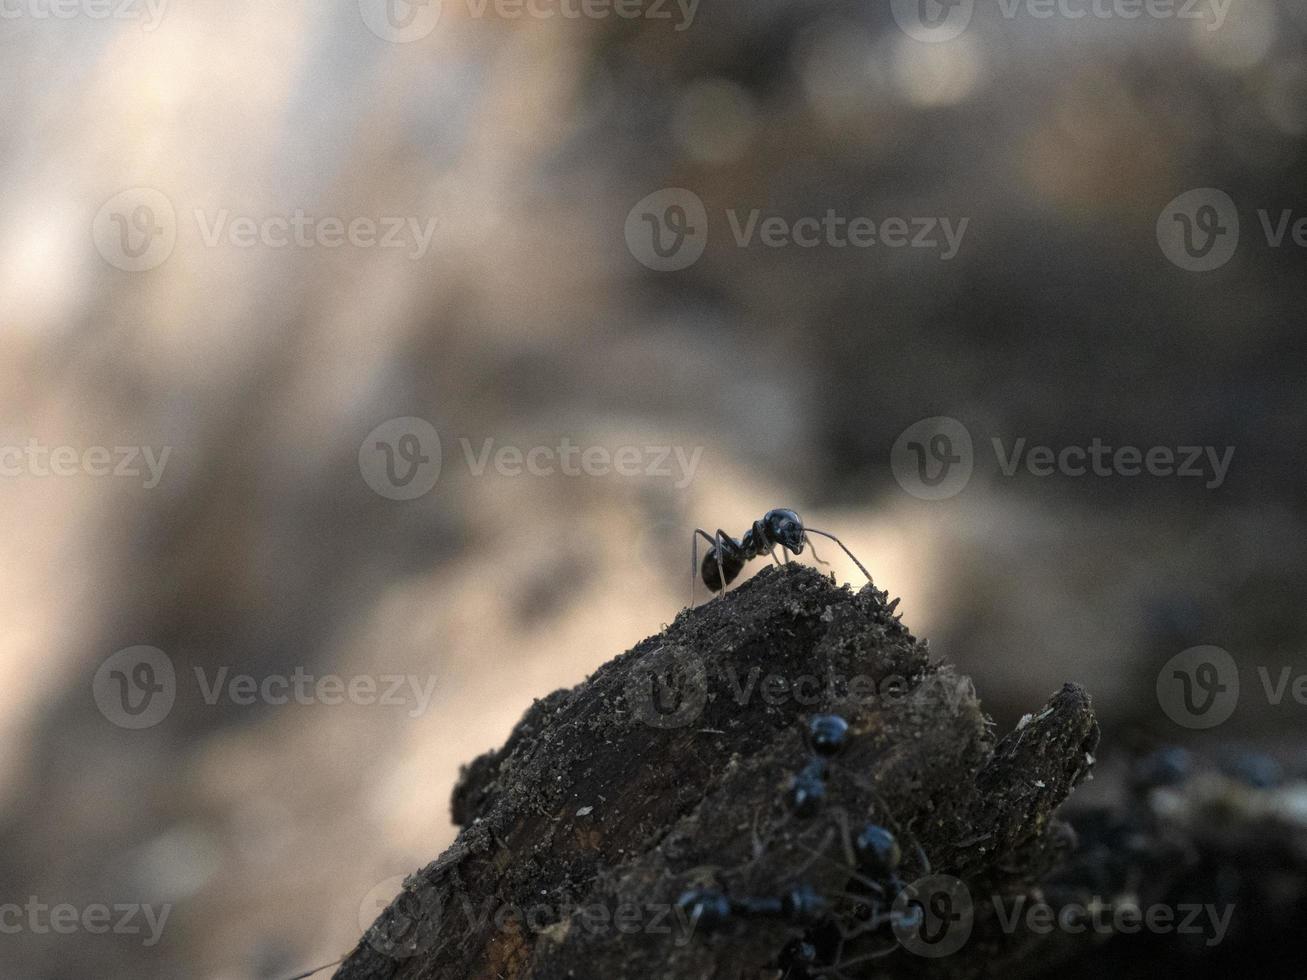 ants inside anthill in the wood photo